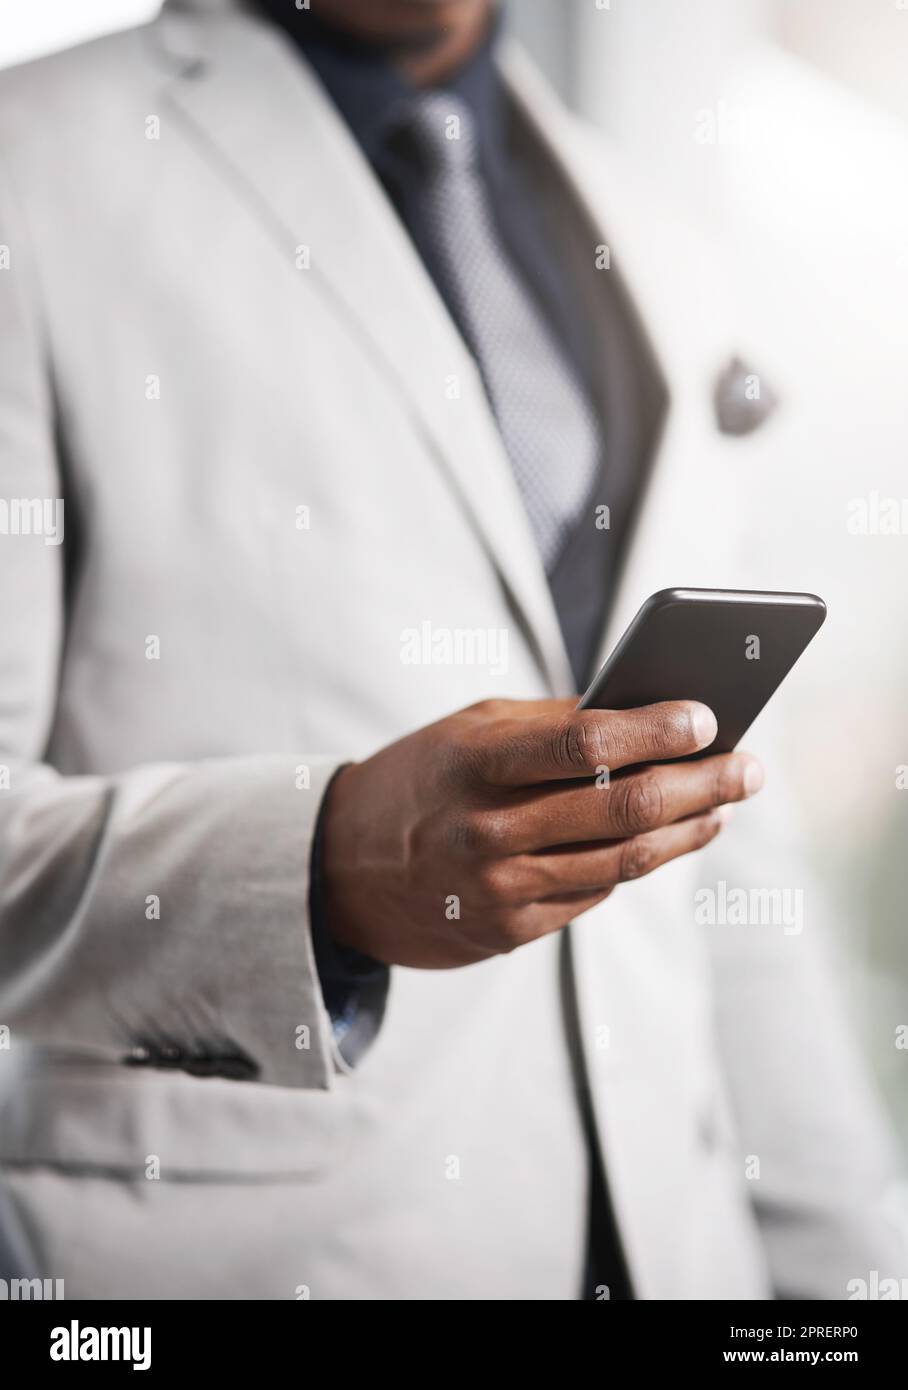 His gateway into keeping his lead in the business game. Closeup shot of an unrecognizable businessman using a cellphone. Stock Photo